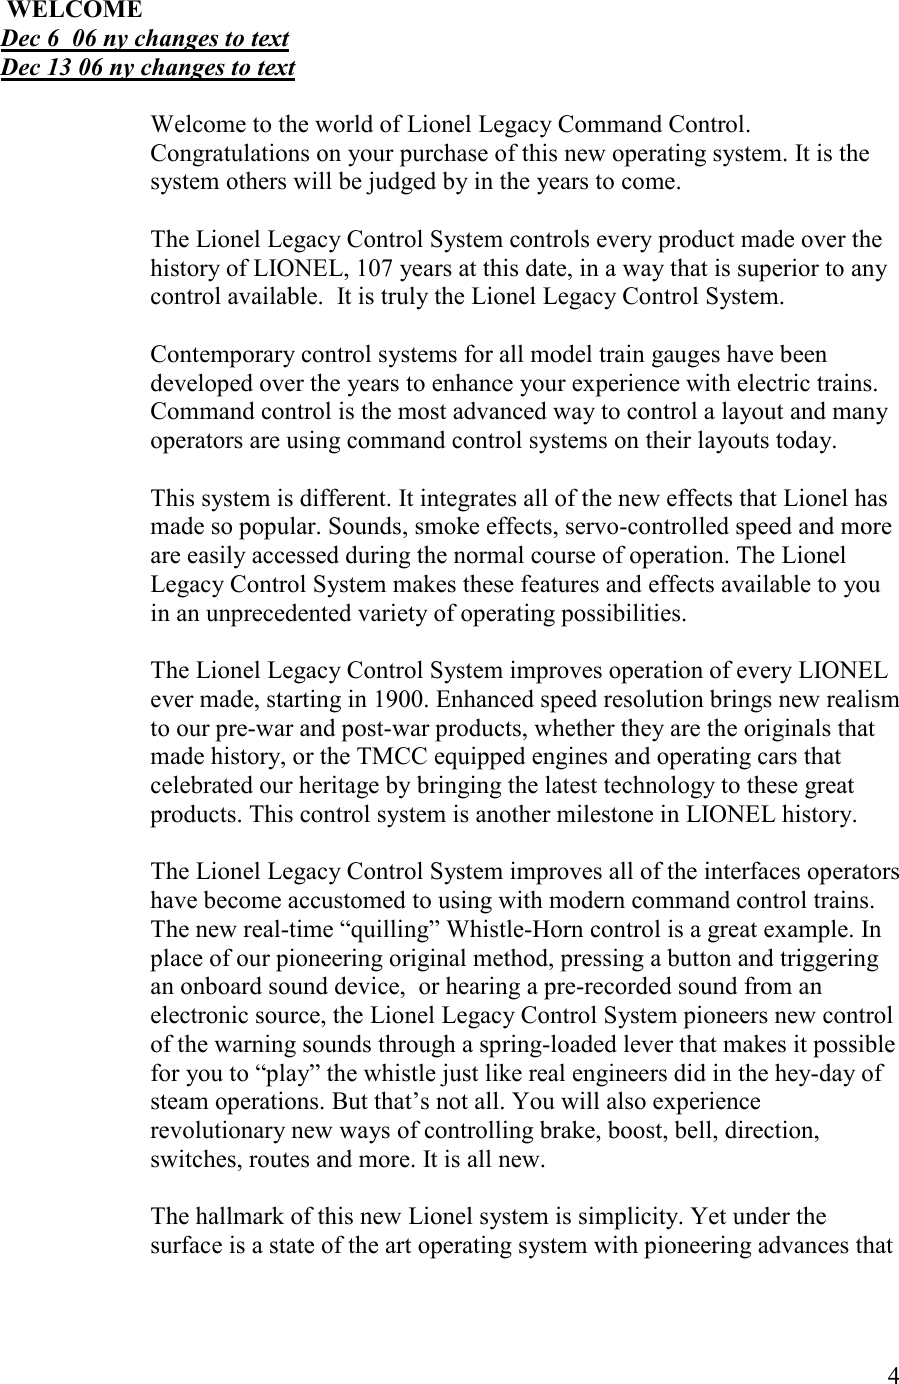   4   WELCOME Dec 6  06 ny changes to text Dec 13 06 ny changes to text  Welcome to the world of Lionel Legacy Command Control. Congratulations on your purchase of this new operating system. It is the system others will be judged by in the years to come.  The Lionel Legacy Control System controls every product made over the history of LIONEL, 107 years at this date, in a way that is superior to any control available.  It is truly the Lionel Legacy Control System.  Contemporary control systems for all model train gauges have been developed over the years to enhance your experience with electric trains. Command control is the most advanced way to control a layout and many operators are using command control systems on their layouts today.  This system is different. It integrates all of the new effects that Lionel has made so popular. Sounds, smoke effects, servo-controlled speed and more are easily accessed during the normal course of operation. The Lionel Legacy Control System makes these features and effects available to you in an unprecedented variety of operating possibilities.   The Lionel Legacy Control System improves operation of every LIONEL ever made, starting in 1900. Enhanced speed resolution brings new realism to our pre-war and post-war products, whether they are the originals that made history, or the TMCC equipped engines and operating cars that celebrated our heritage by bringing the latest technology to these great products. This control system is another milestone in LIONEL history.  The Lionel Legacy Control System improves all of the interfaces operators have become accustomed to using with modern command control trains. The new real-time “quilling” Whistle-Horn control is a great example. In place of our pioneering original method, pressing a button and triggering an onboard sound device,  or hearing a pre-recorded sound from an electronic source, the Lionel Legacy Control System pioneers new control of the warning sounds through a spring-loaded lever that makes it possible for you to “play” the whistle just like real engineers did in the hey-day of steam operations. But that’s not all. You will also experience revolutionary new ways of controlling brake, boost, bell, direction, switches, routes and more. It is all new.  The hallmark of this new Lionel system is simplicity. Yet under the surface is a state of the art operating system with pioneering advances that 